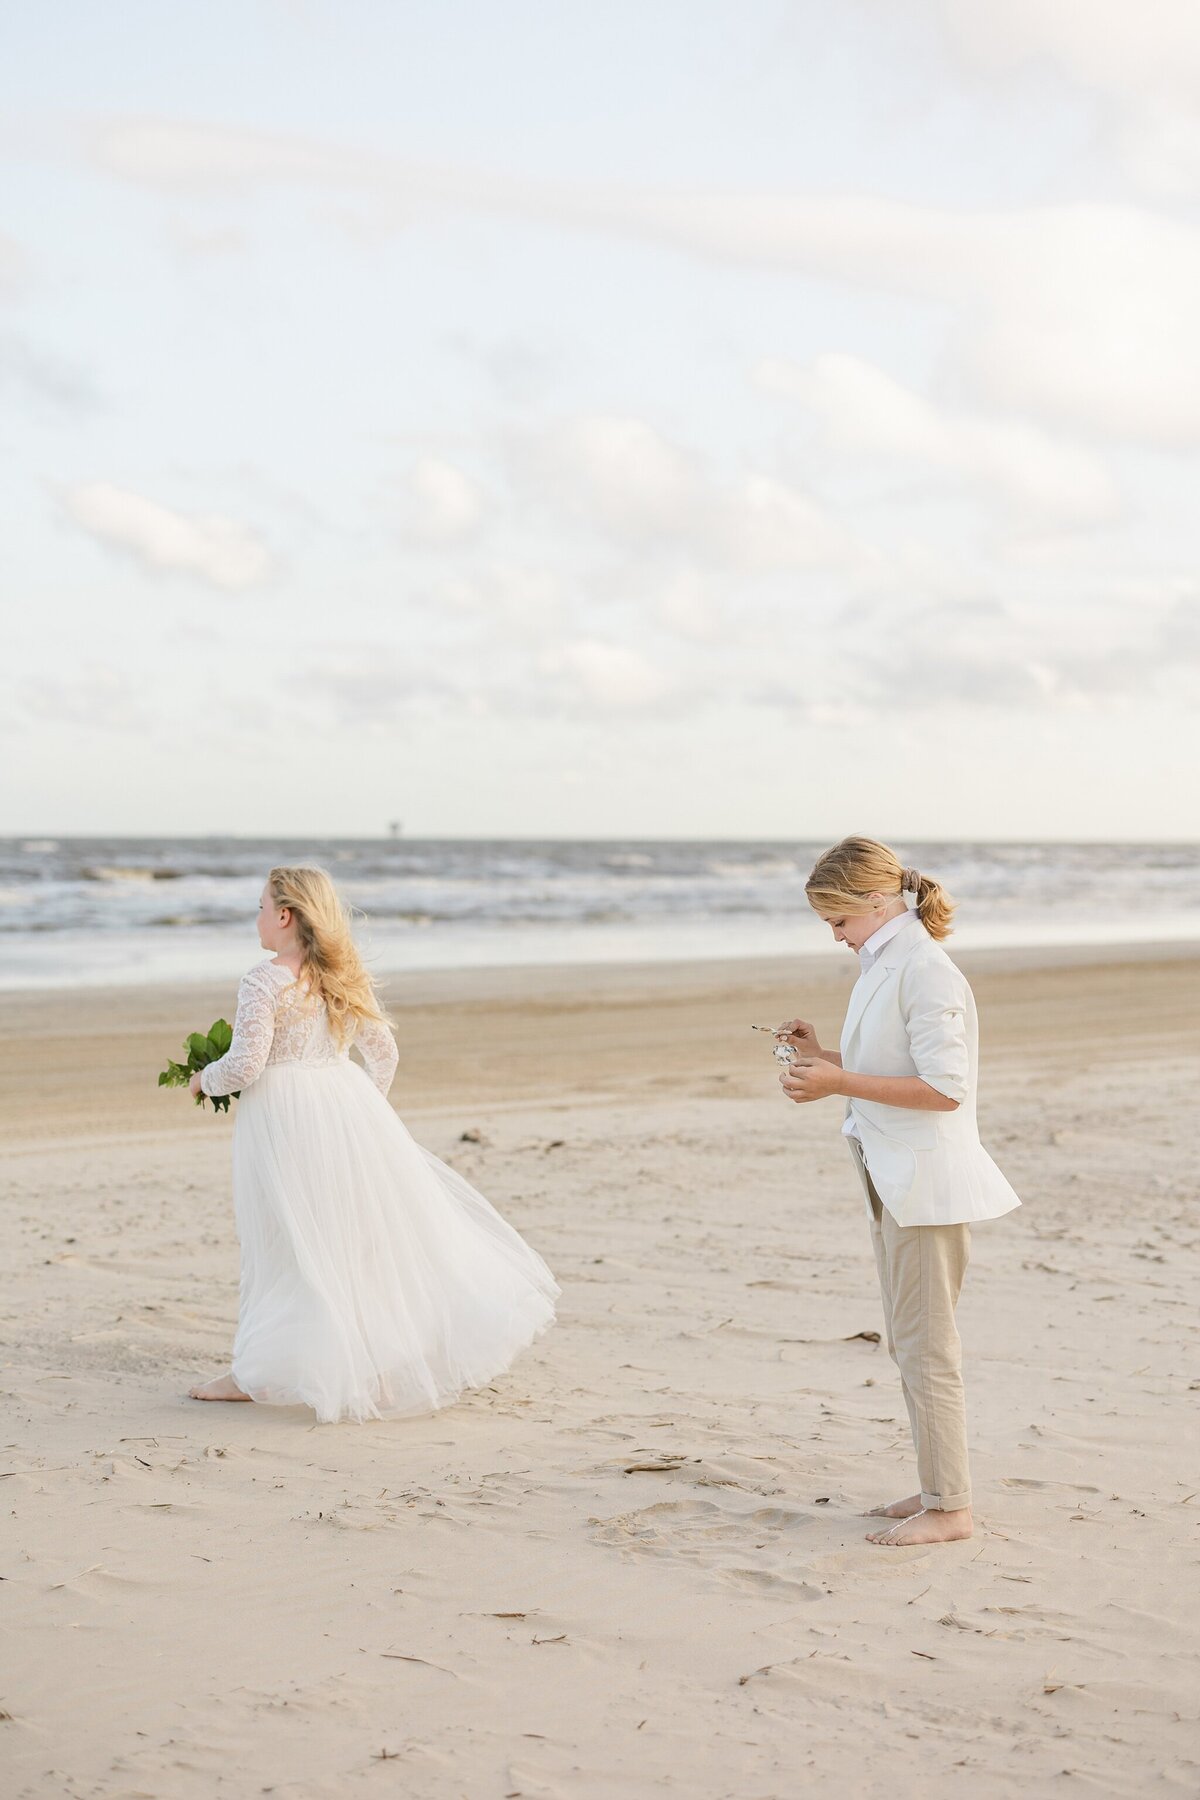 Candid shot of two child attendants waiting patiently on the beach before a wedding ceremony at Crystal Beach, Texas. The child on the left is wearing a flowing, white dress, is holding a bouquet, and is looking out at the ocean. The child on the right is wearing a jacket, khaki pants, and is looking down at something in their hands.